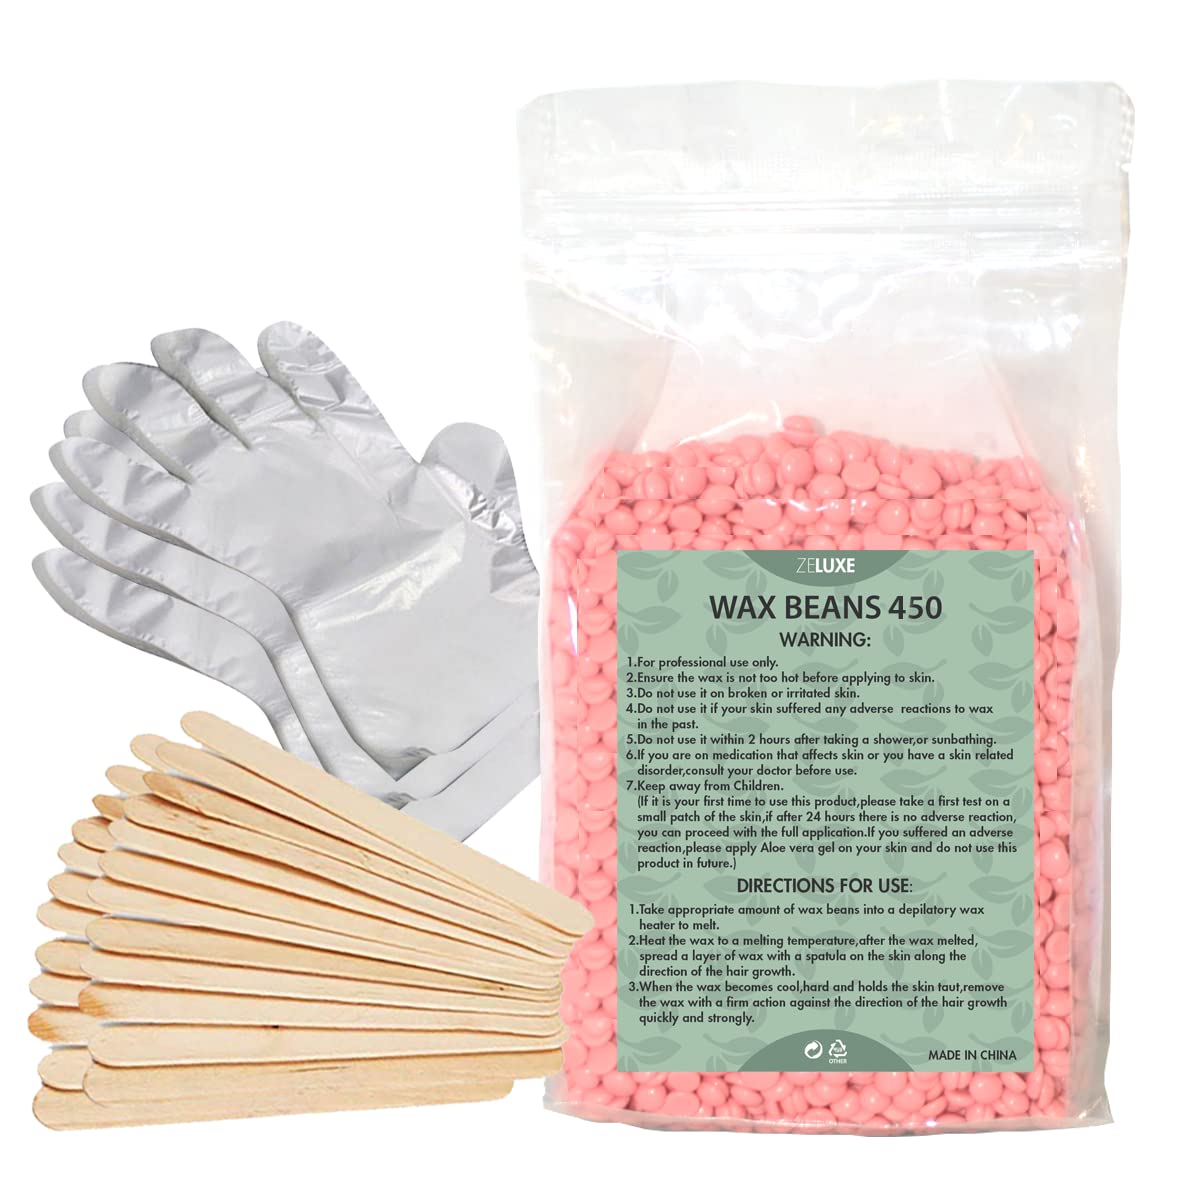 Professional Hard Wax Beads 450g, Gloves & Applicators Included, Hard Waxing Beads Depilatory, Waxing Pellets for Hair Removal, Waxing from Home, Full Body, Bikini, Legs, face, Underarm. Stripless Wax